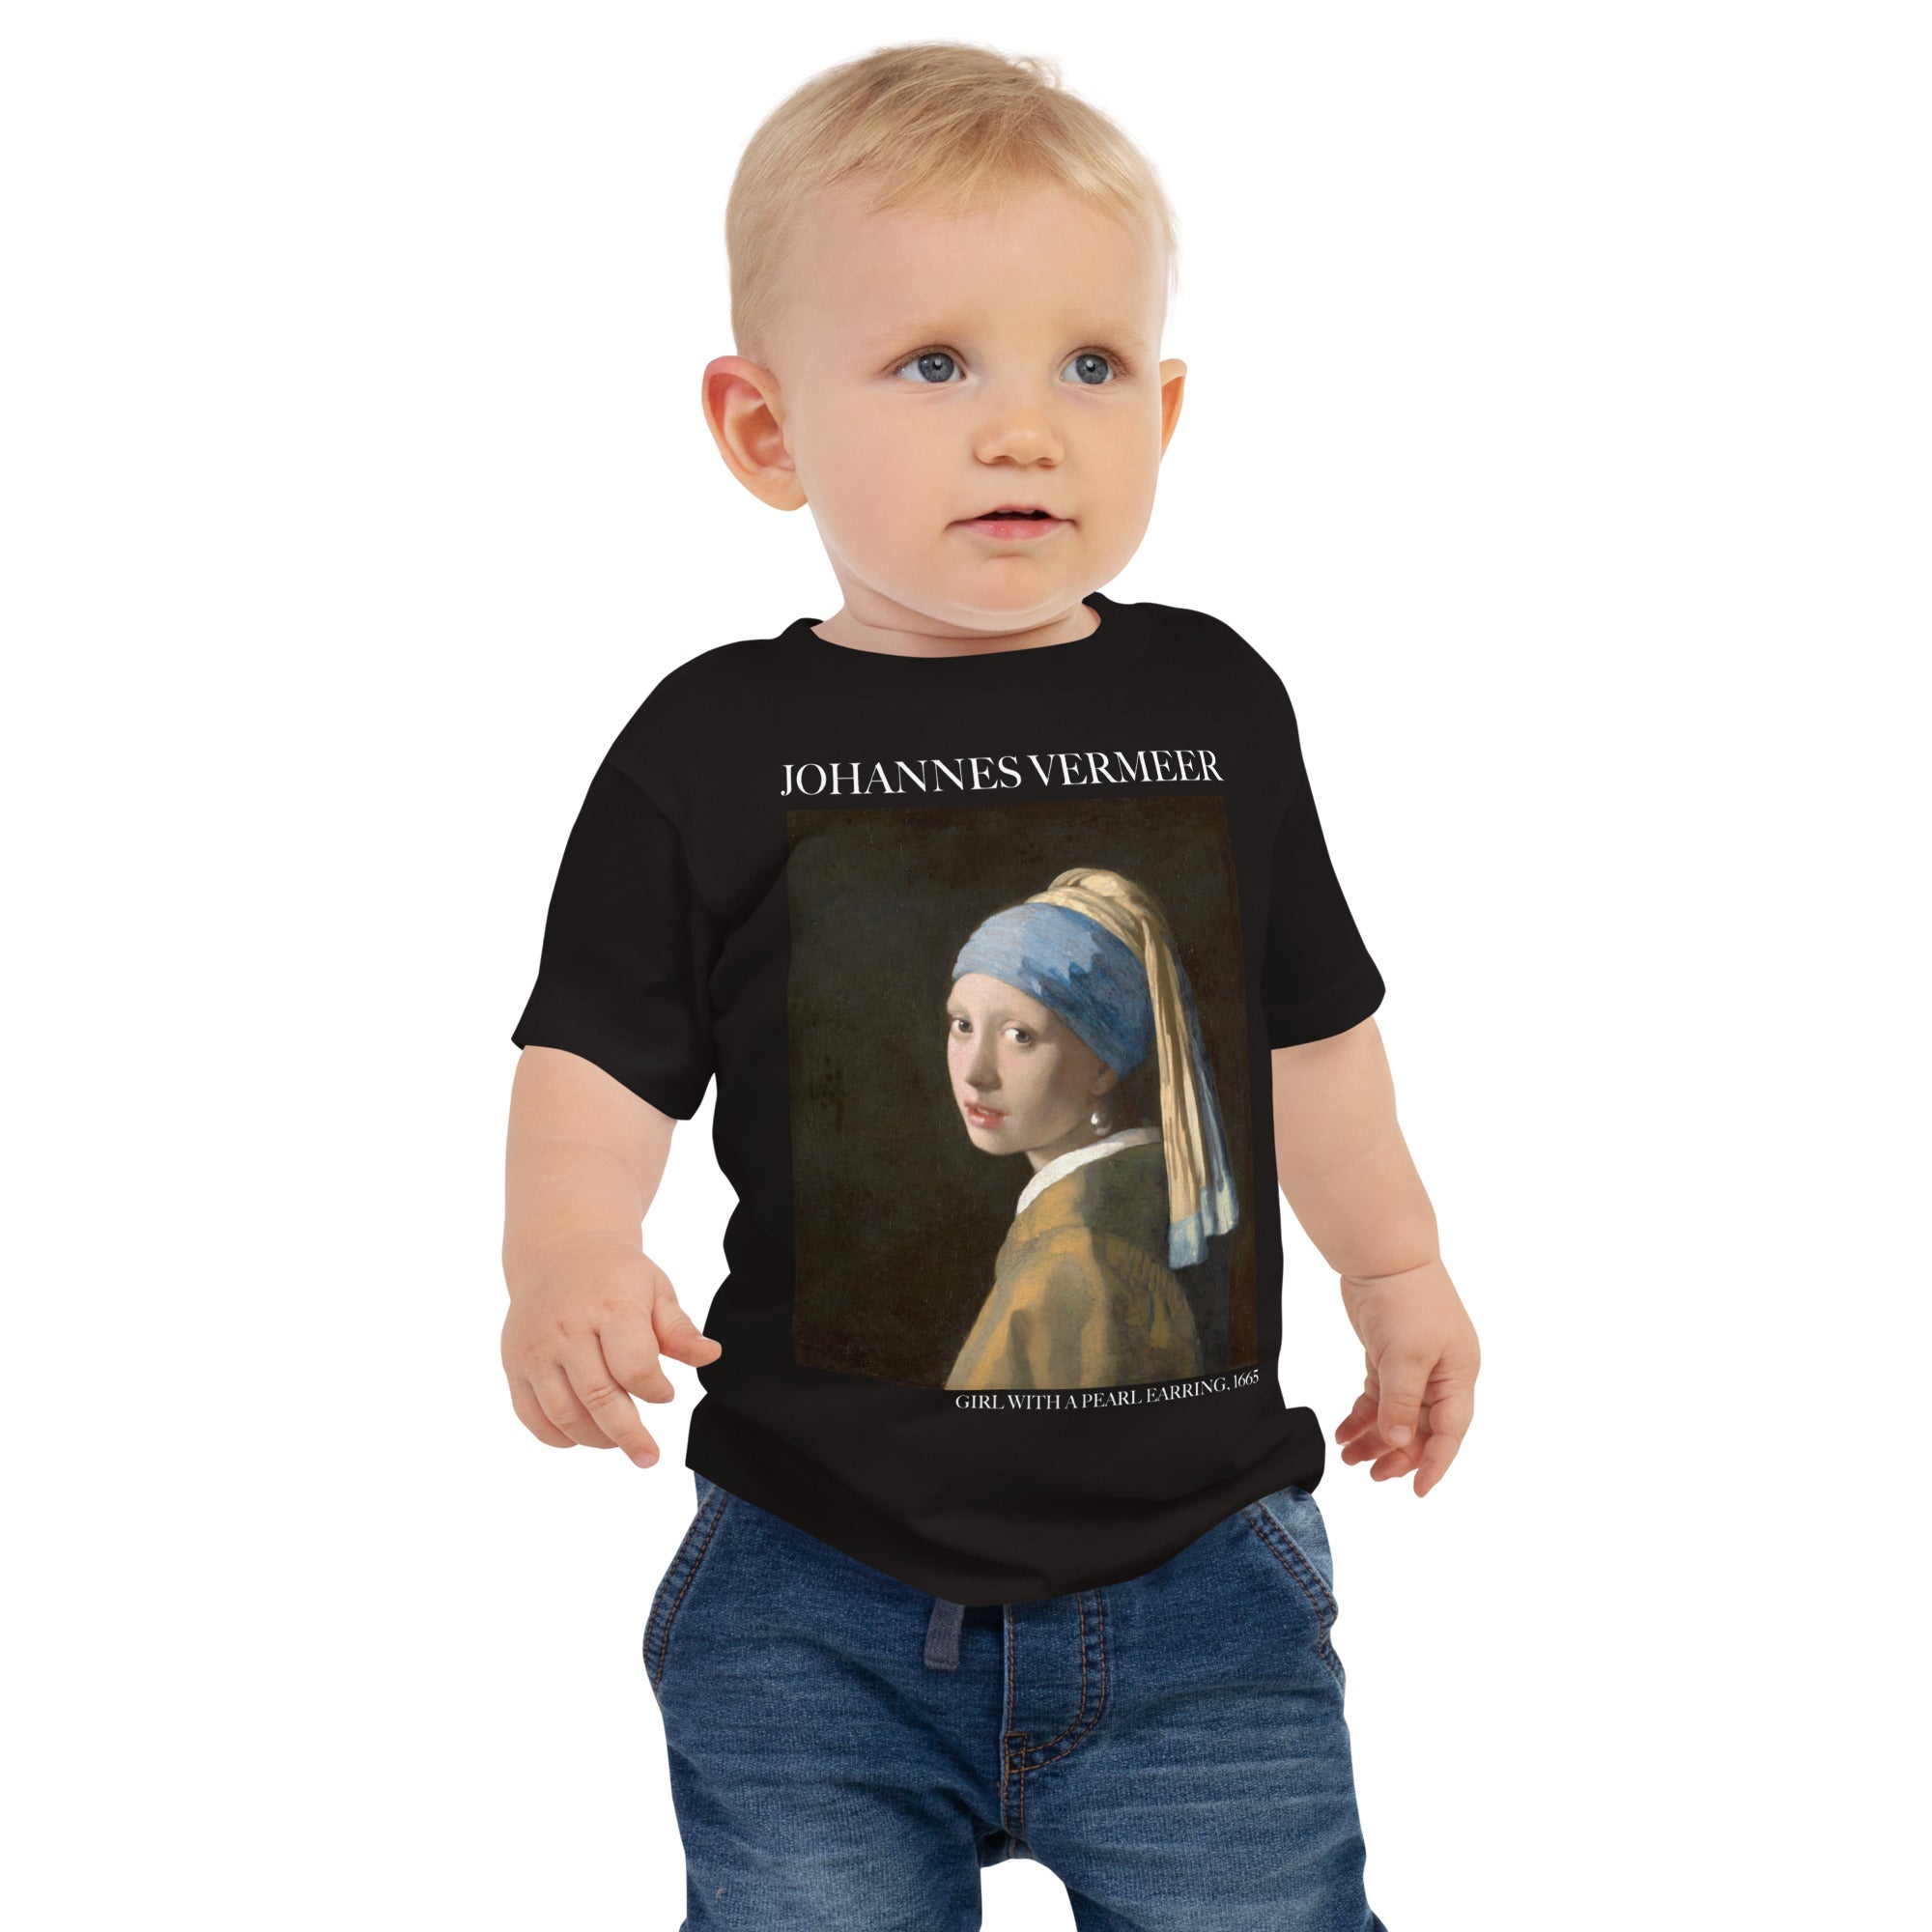 Johannes Vermeer 'Girl with a Pearl Earring' Famous Painting Baby Staple T-Shirt | Premium Baby Art Tee